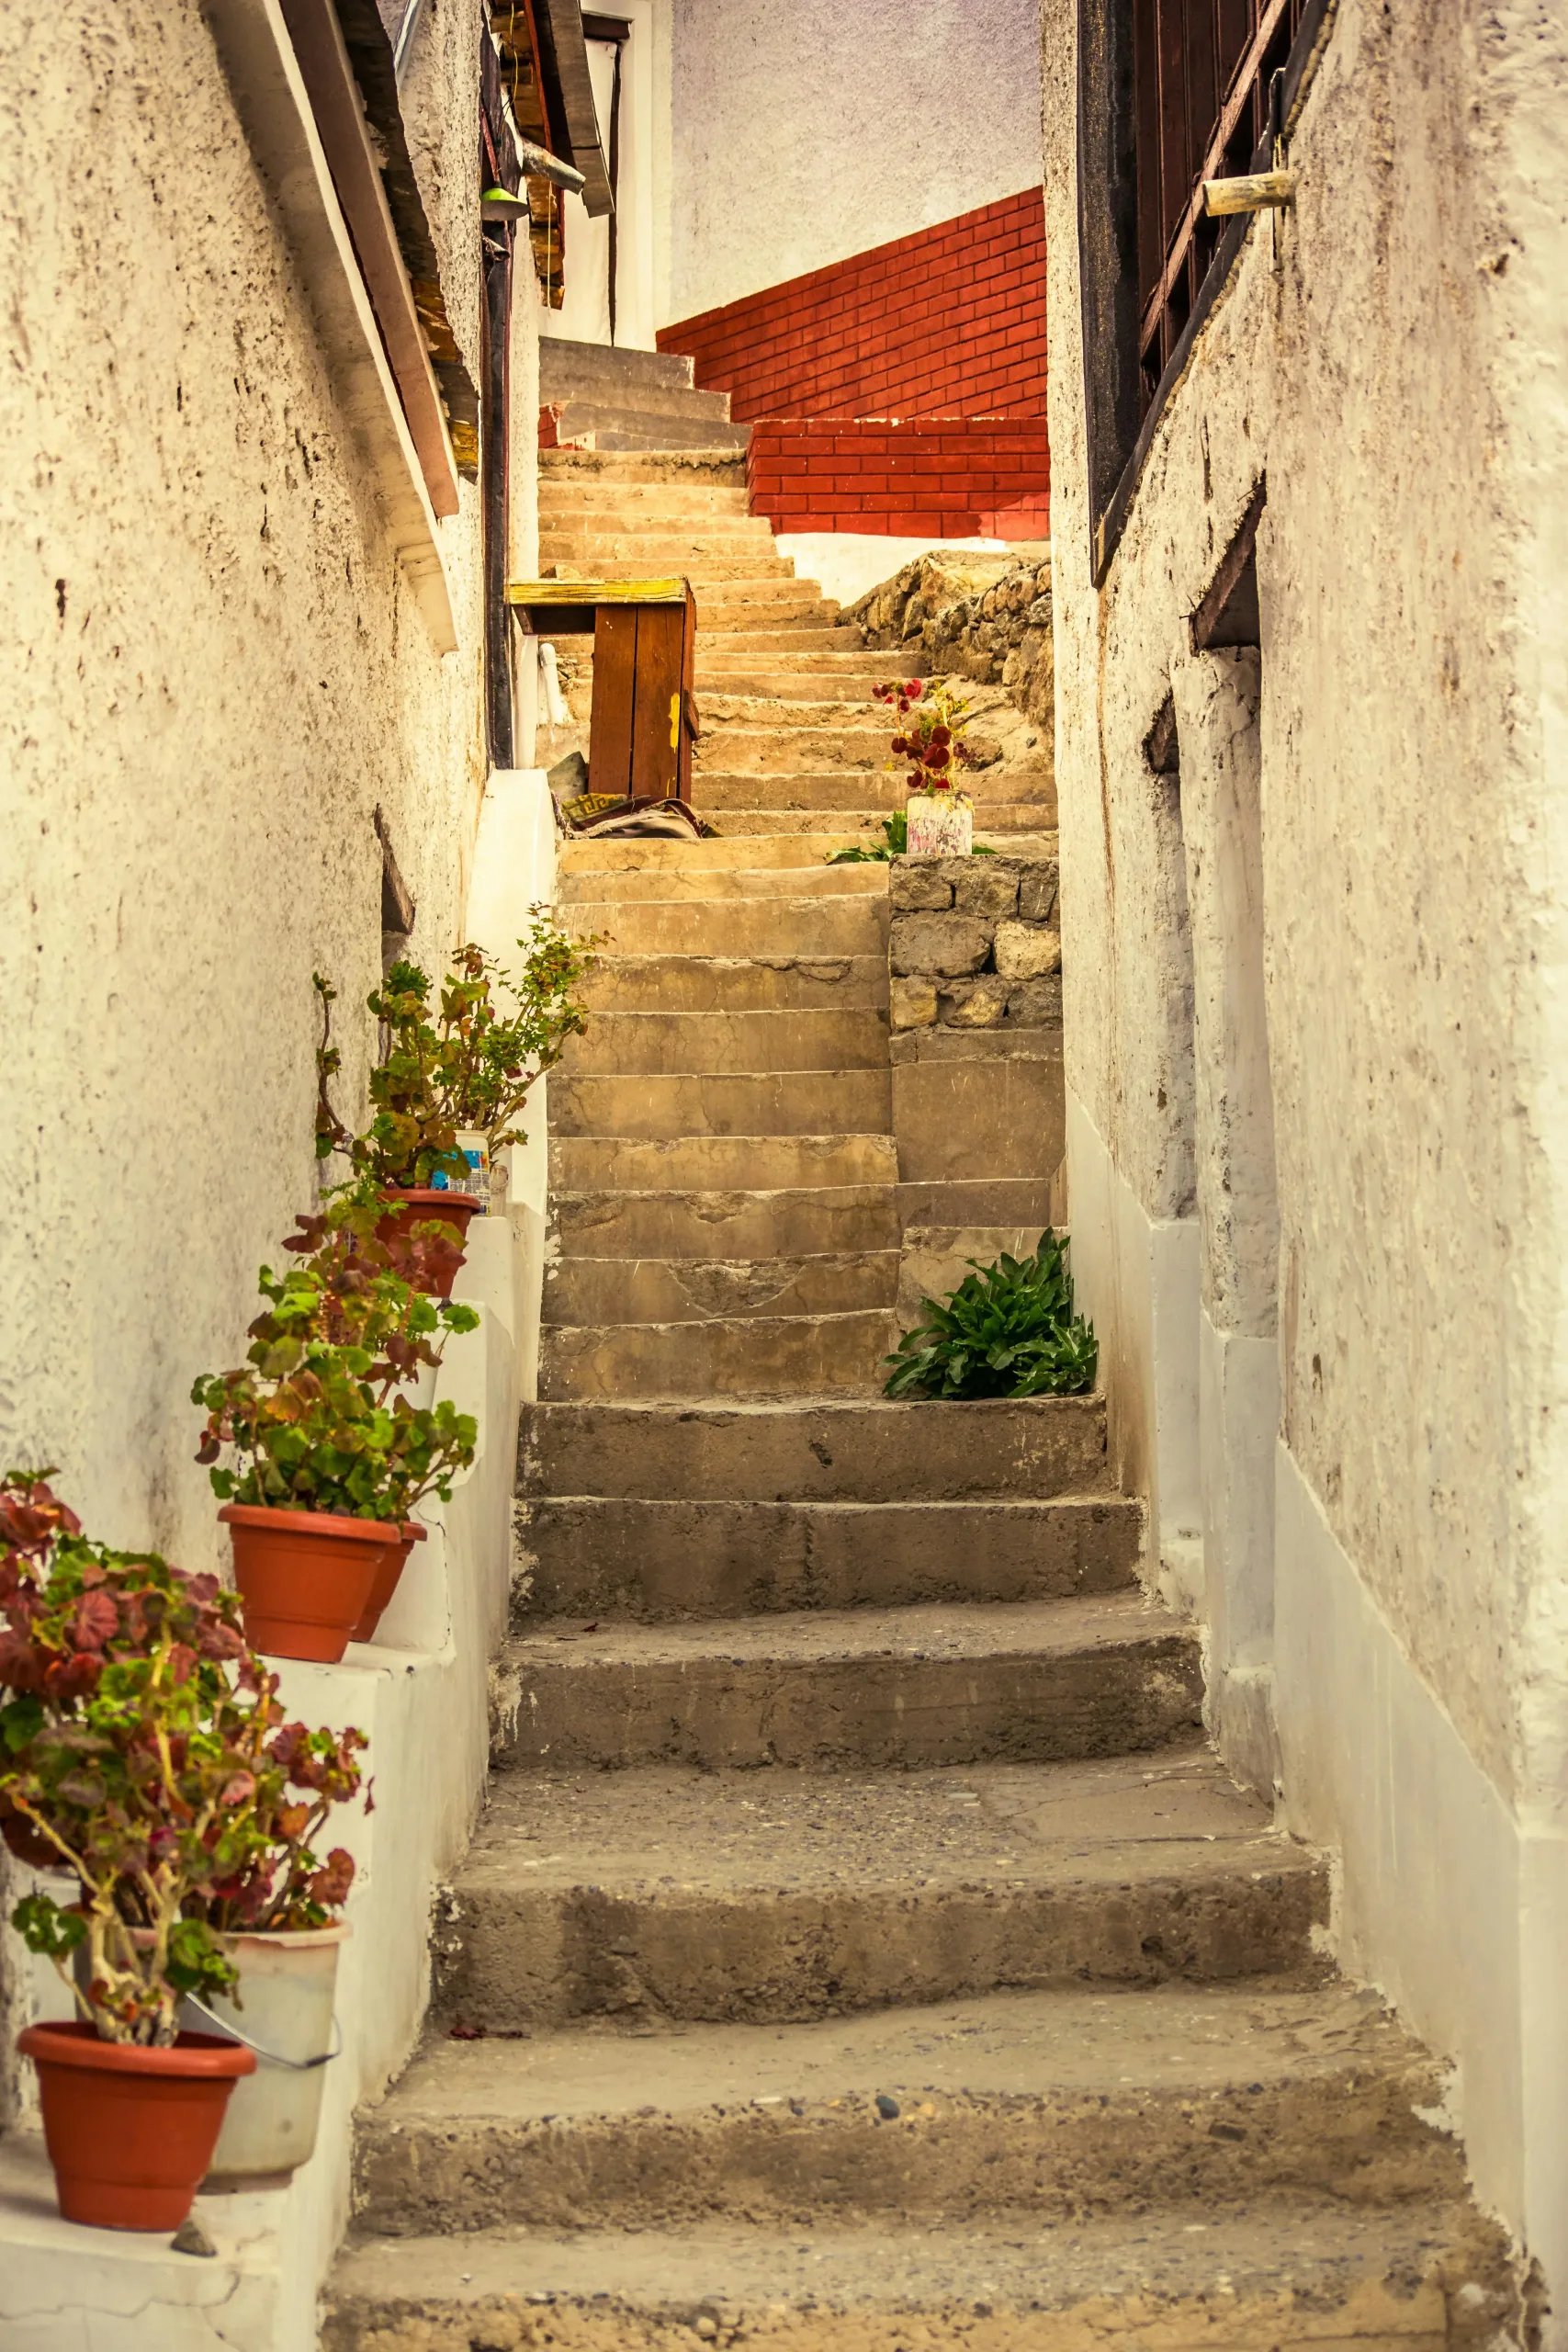 Image of an outdoor staircase